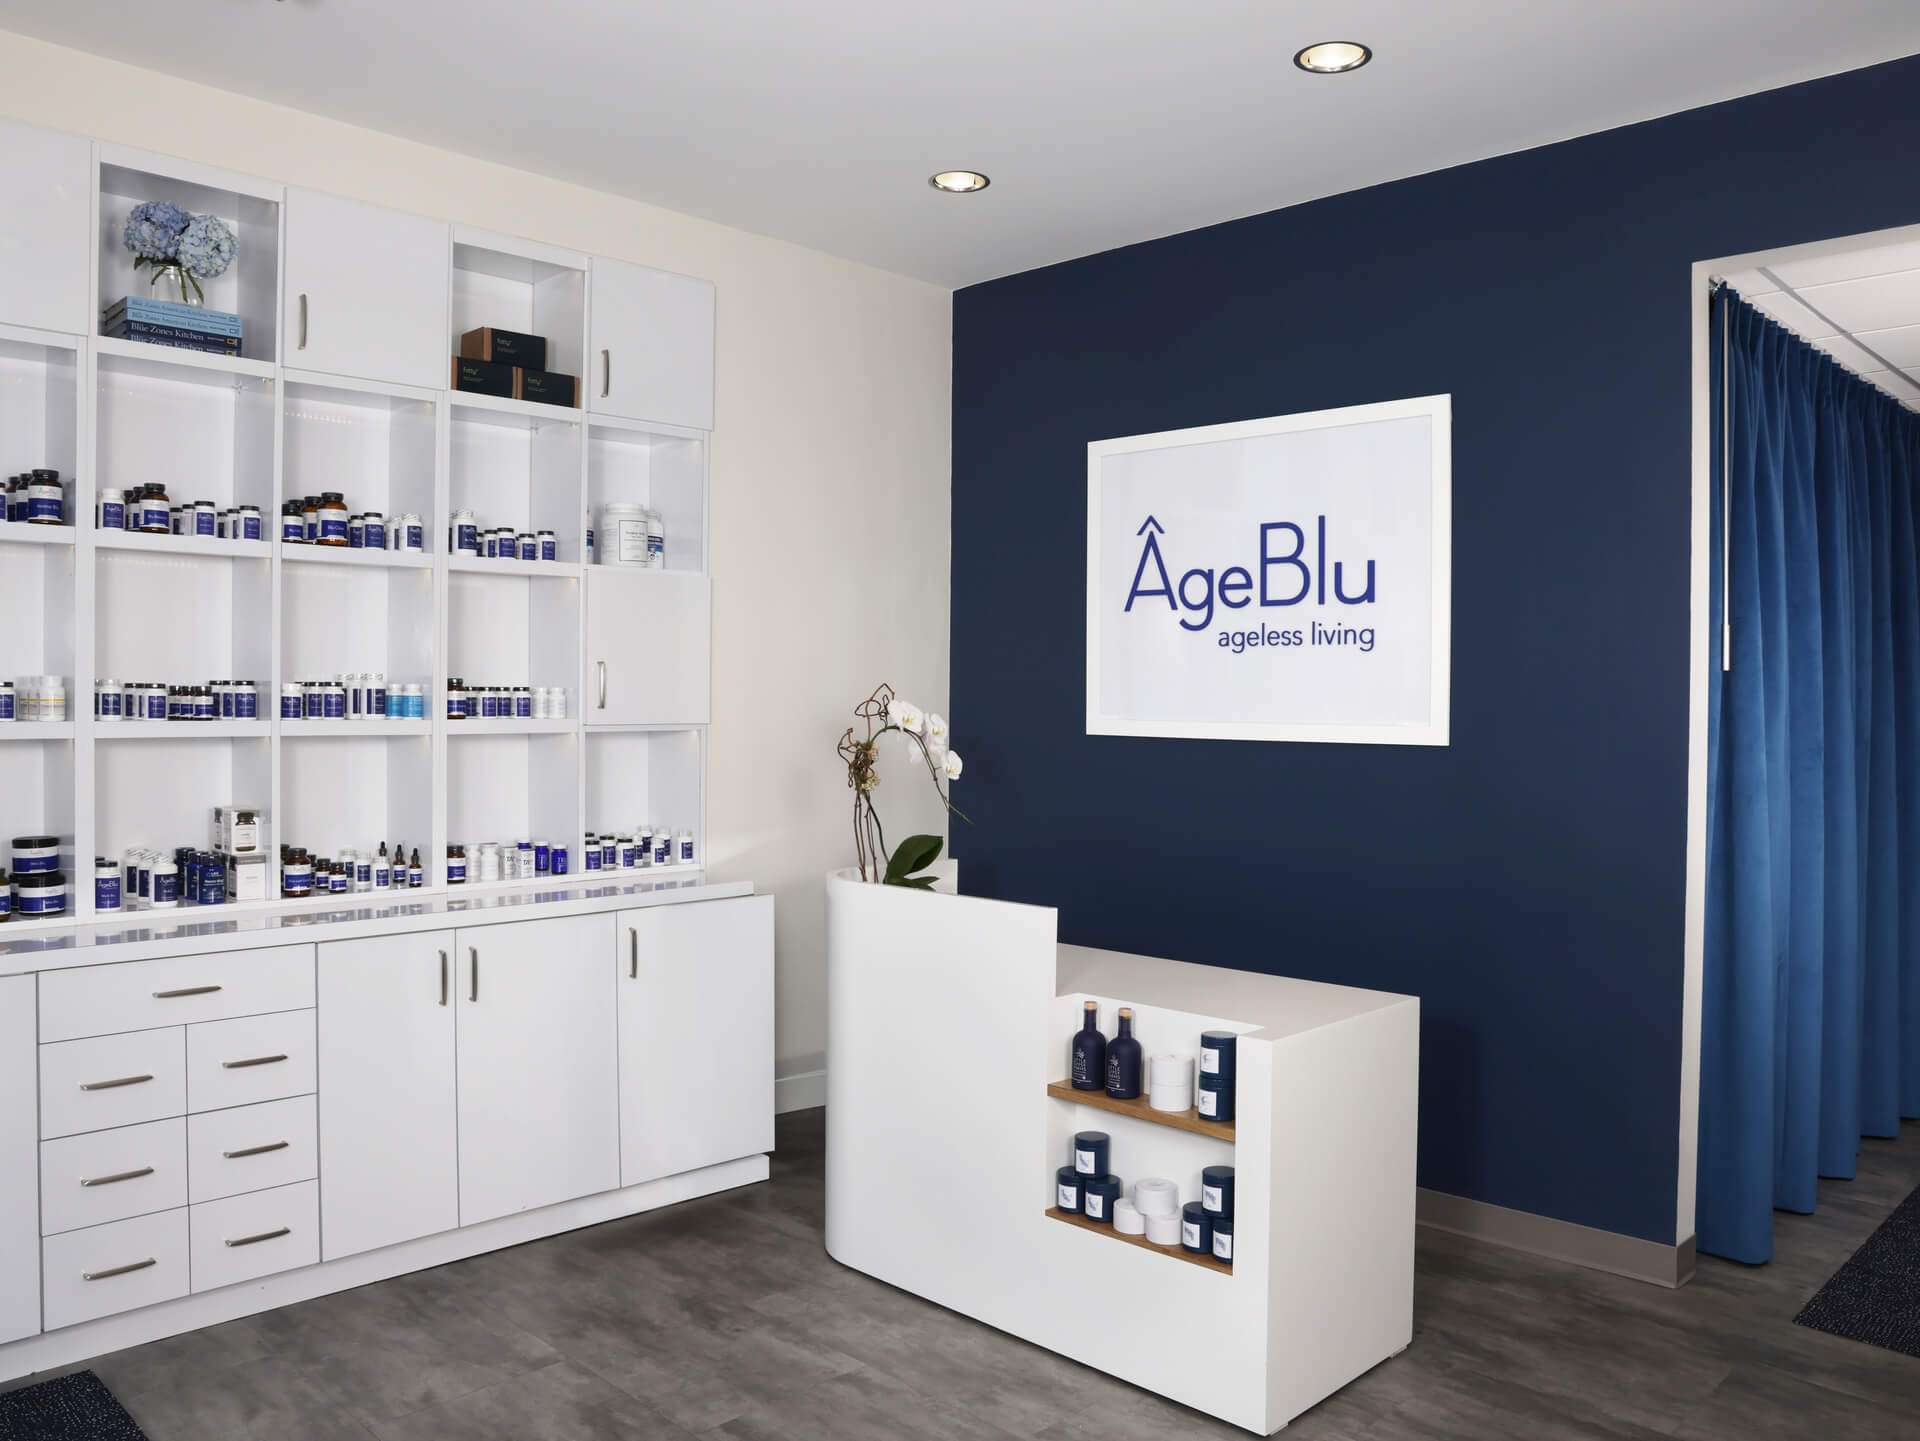 The retail space of the Ageblu clinic showing a shelf of supplements